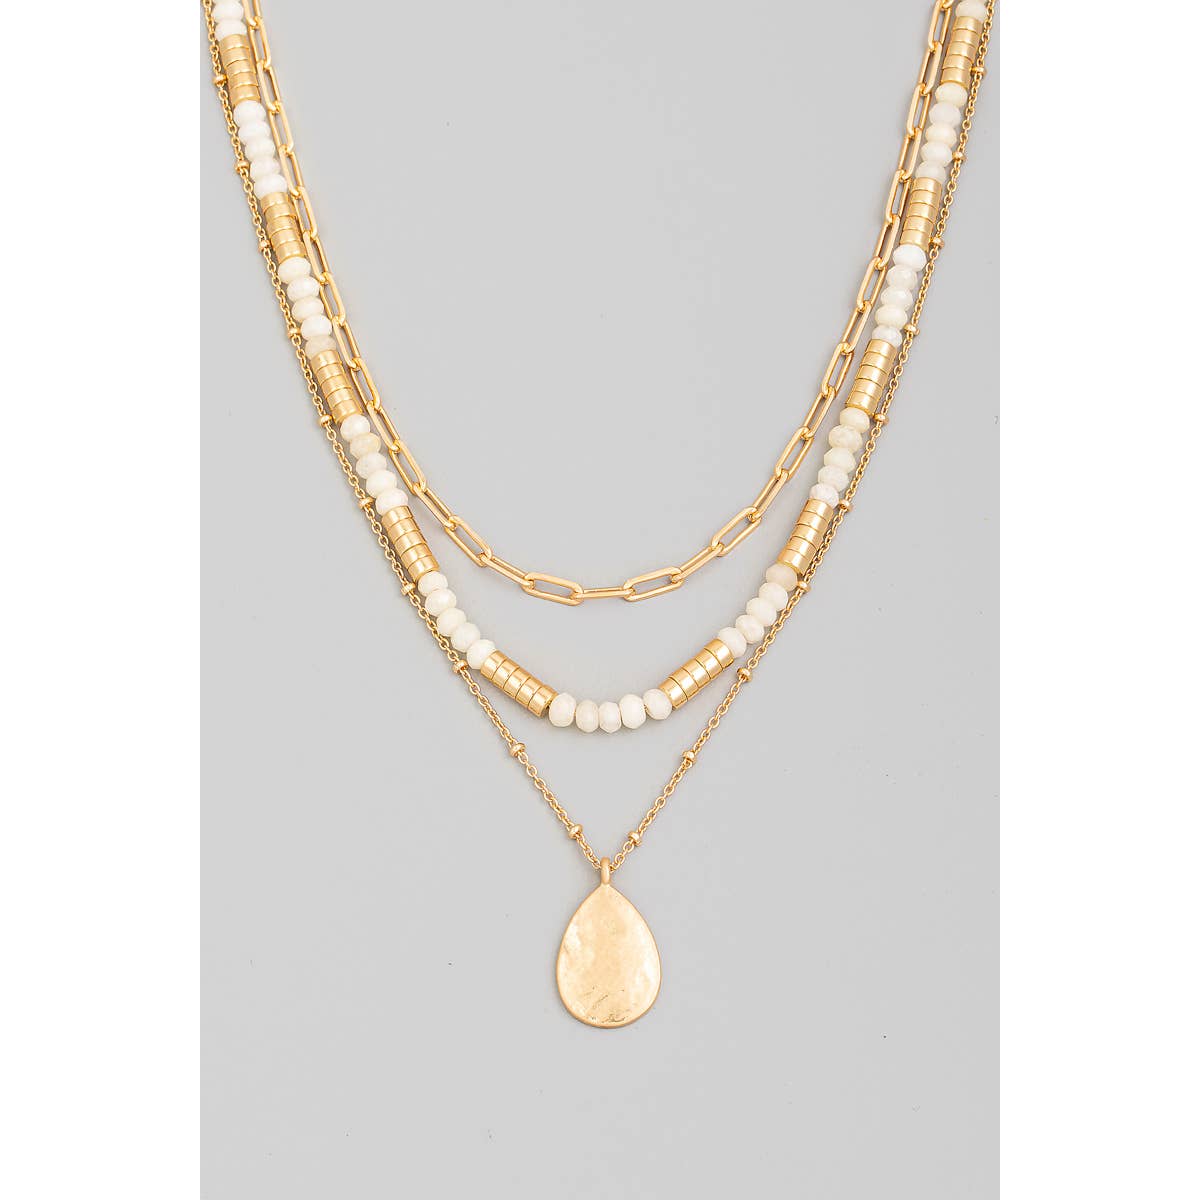 Tear Drop Charm Layered Beads Chain Necklace | Stuffology Boutique-Necklaces-The Looks by Fame Accessories-Stuffology - Where Vintage Meets Modern, A Boutique for Real Women in Crosbyton, TX